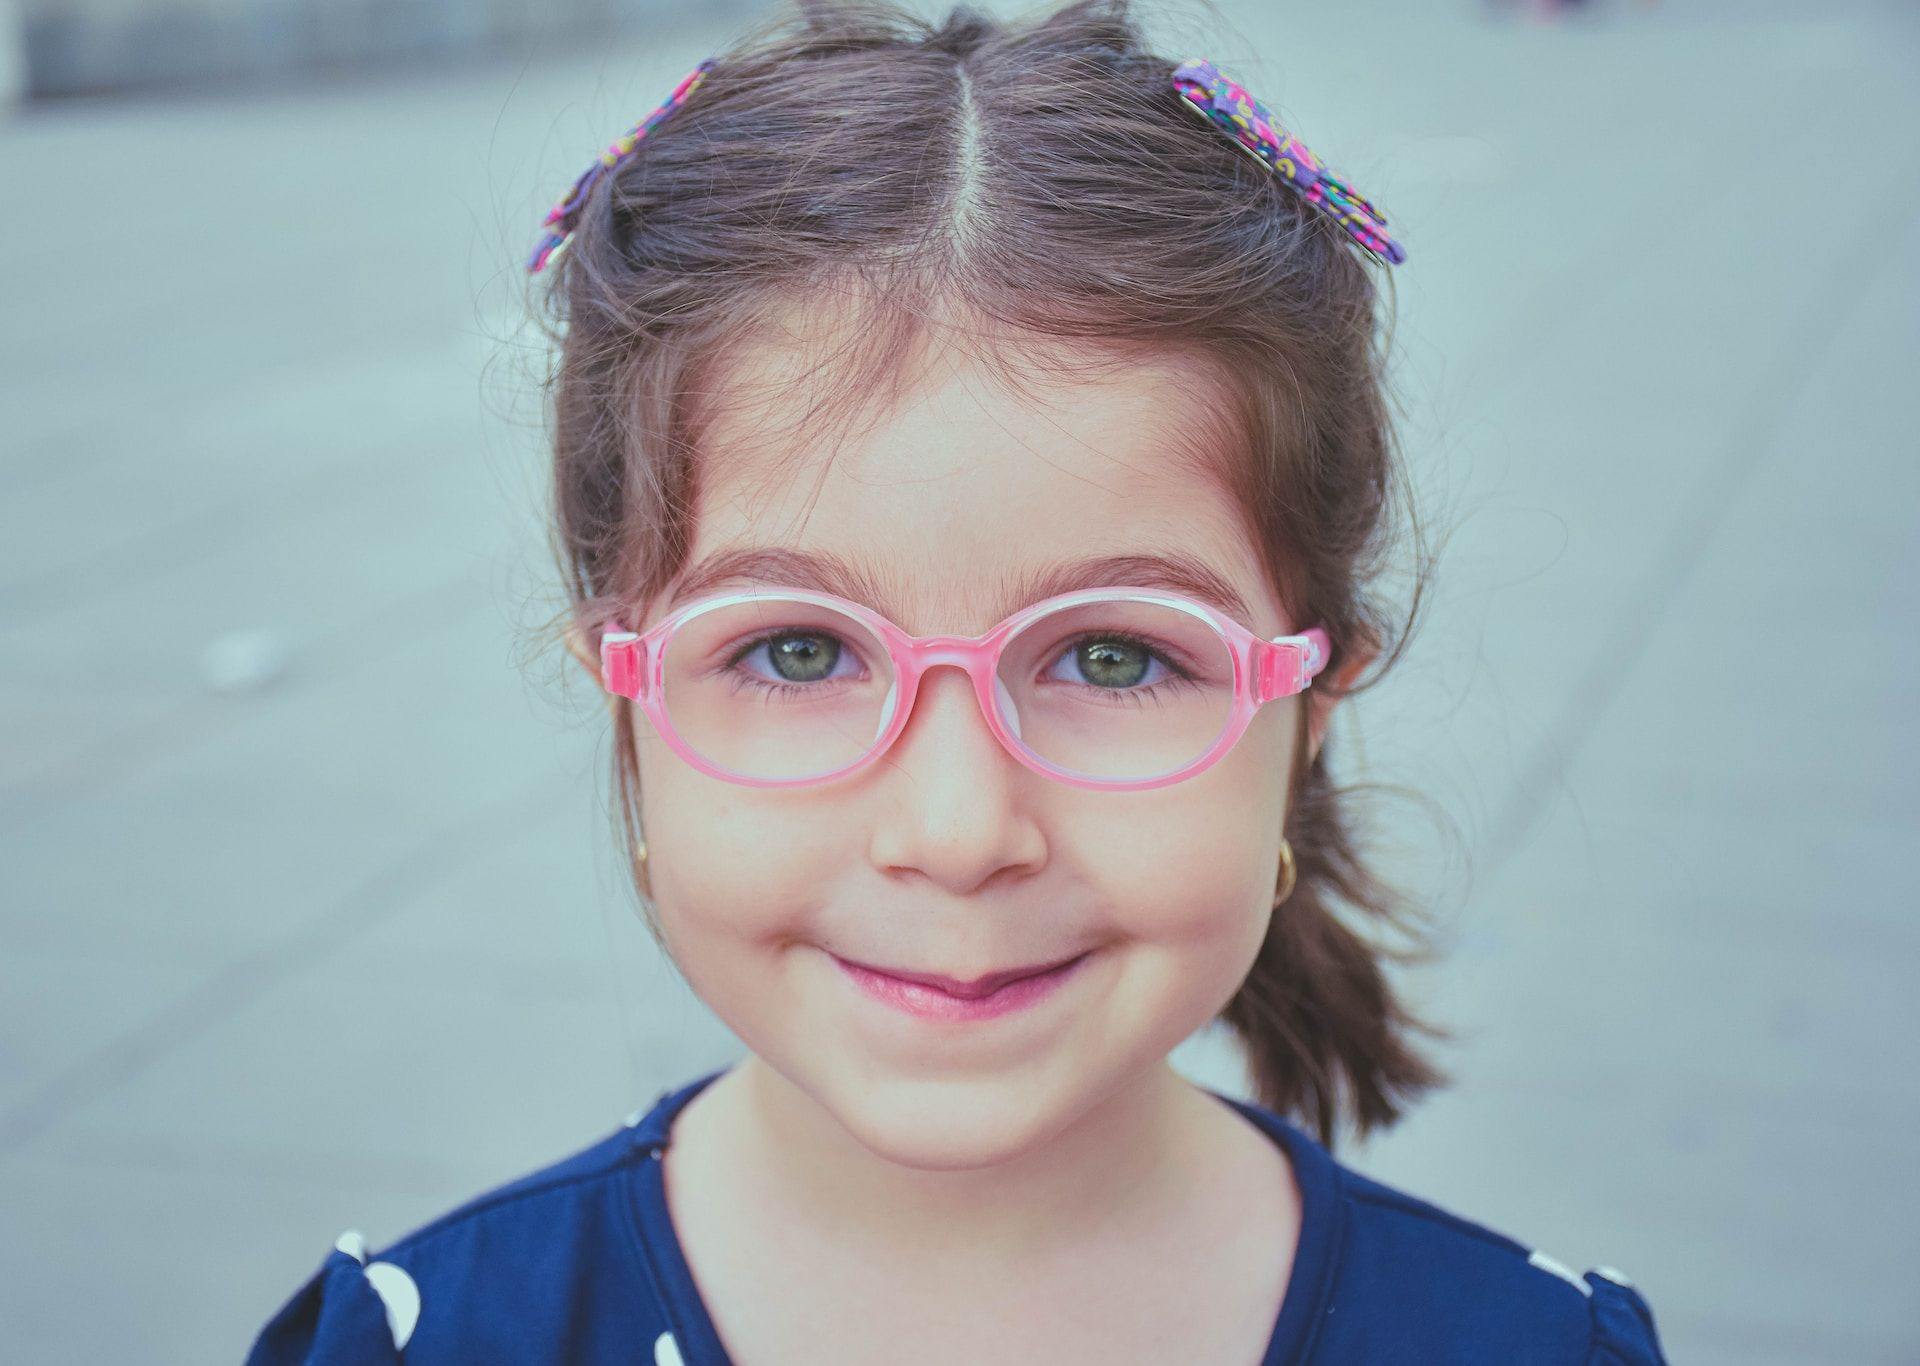 Children's Eye Health: Tips for Summertime and Summer Vacation